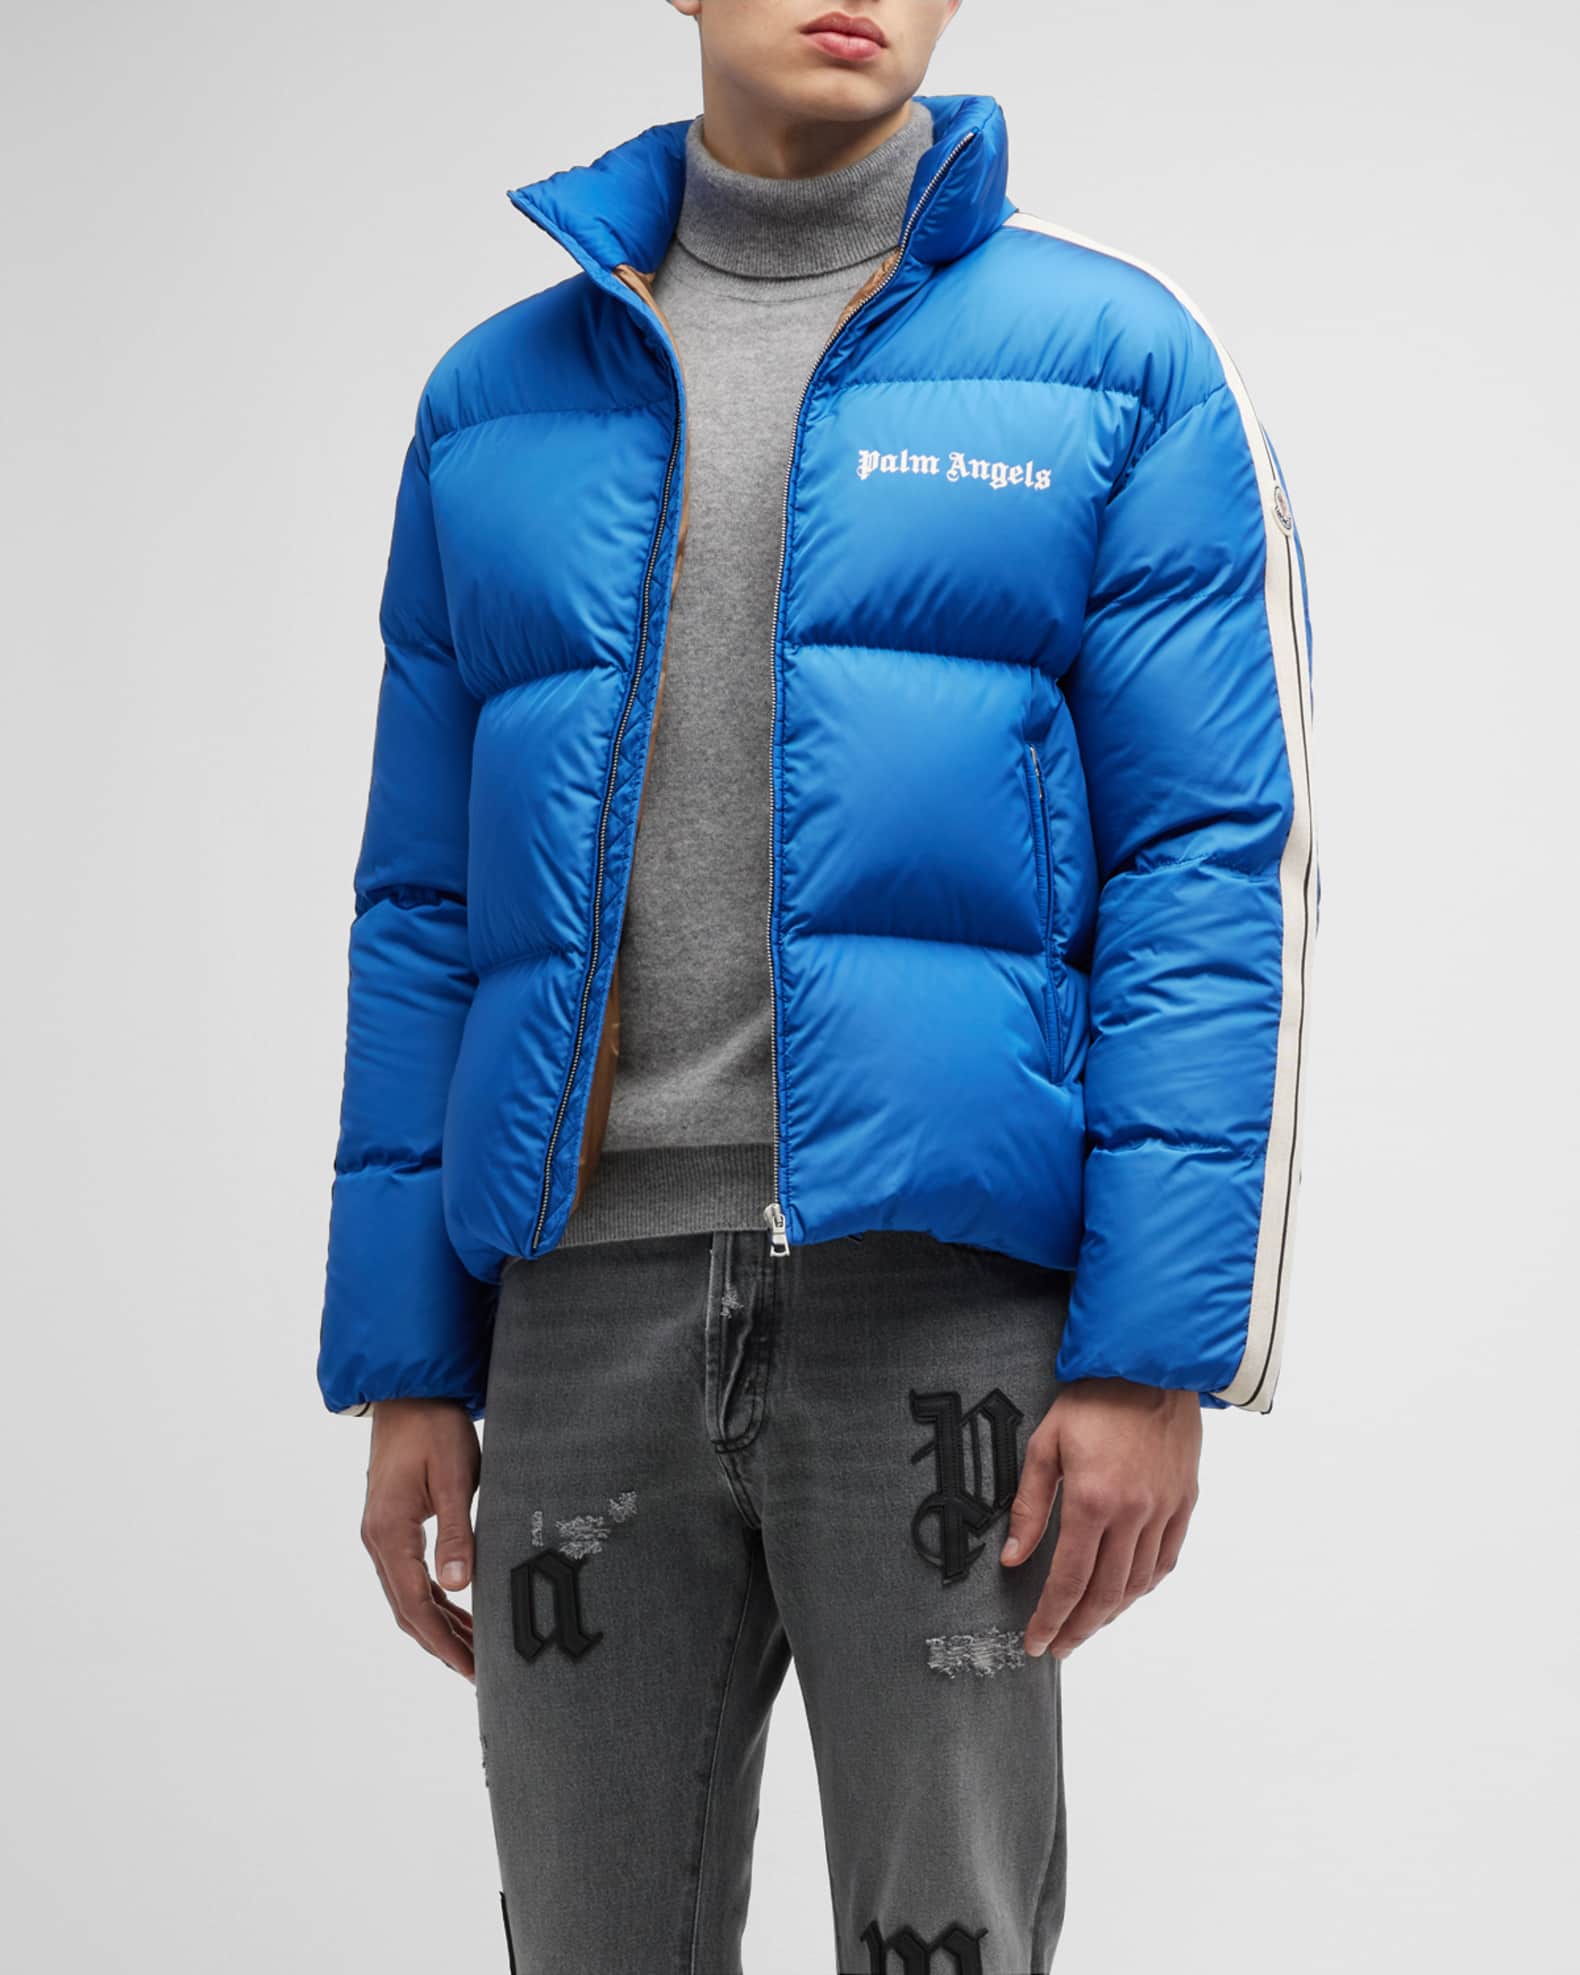 8 MONCLER PALM ANGELS RODMAN JACKET in blue - Palm Angels® Official